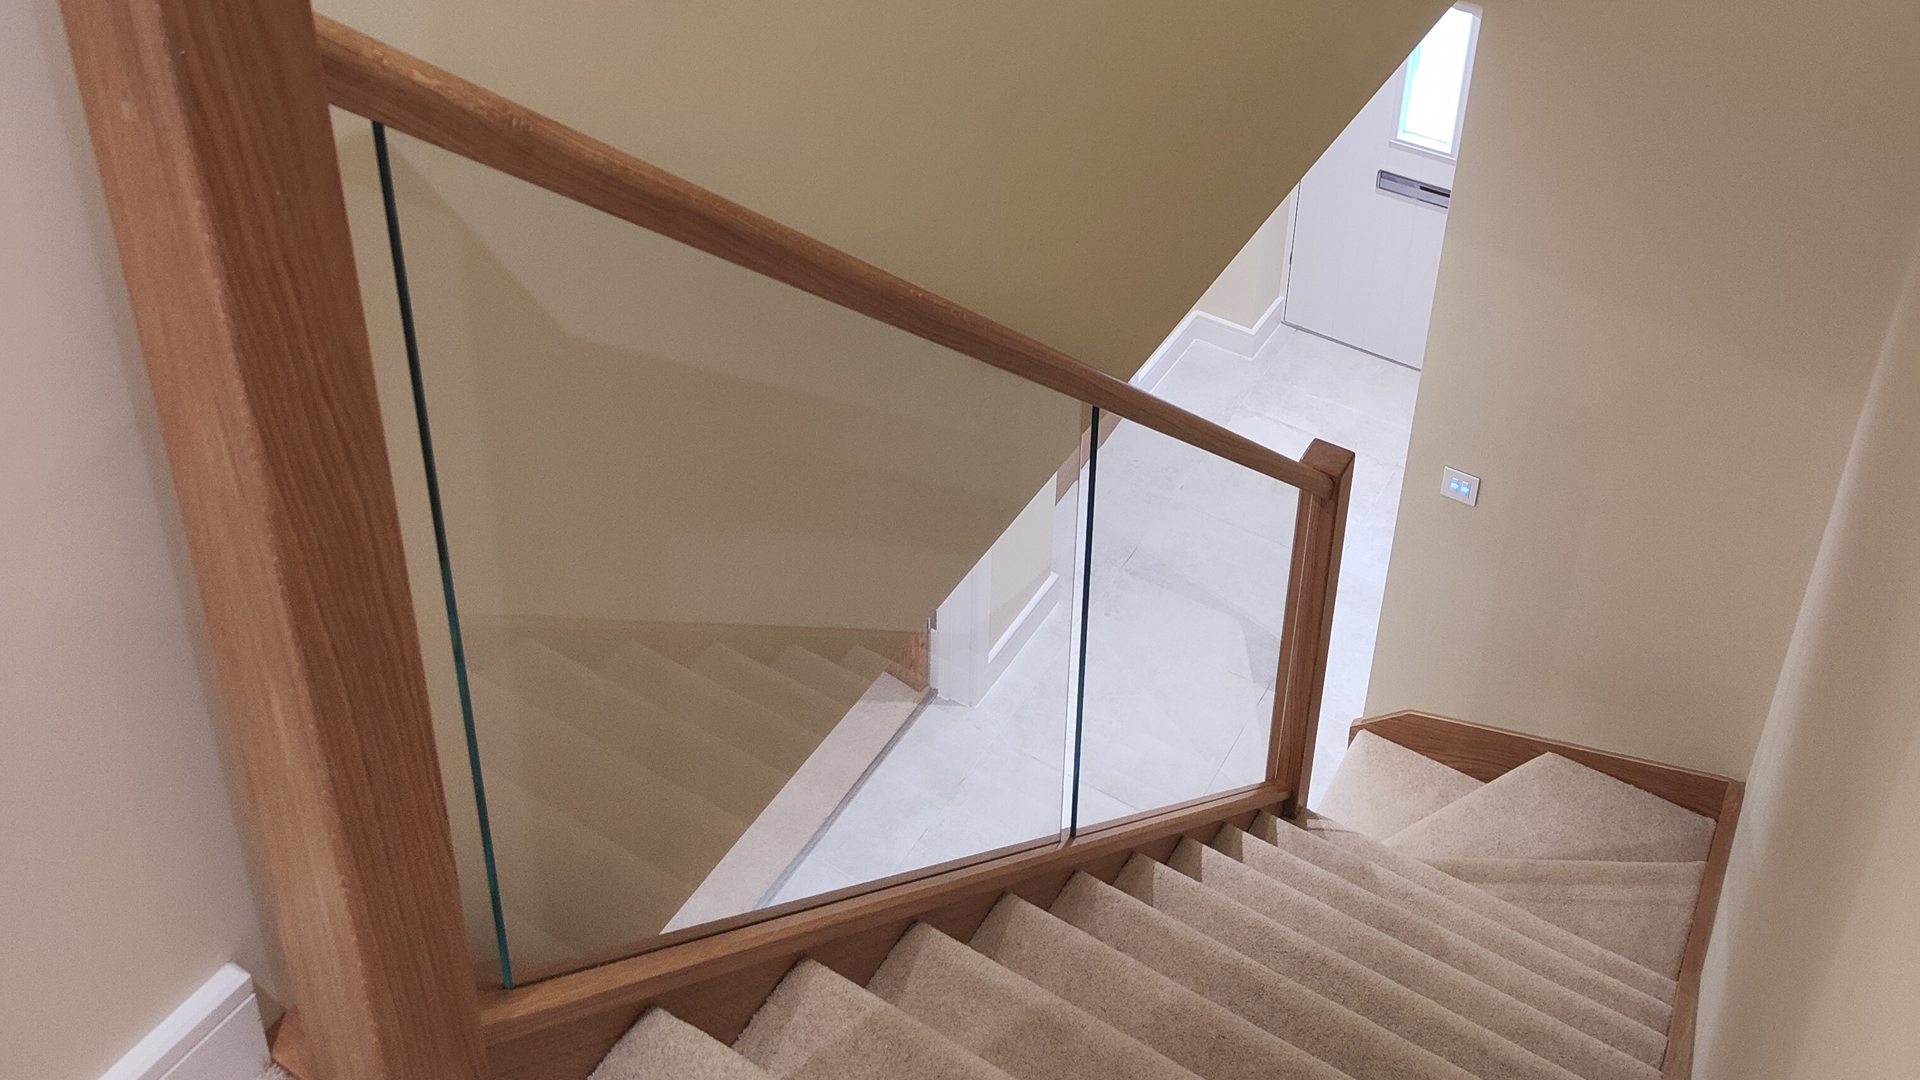 oak stair handrail with glass railing and carpeted stairs